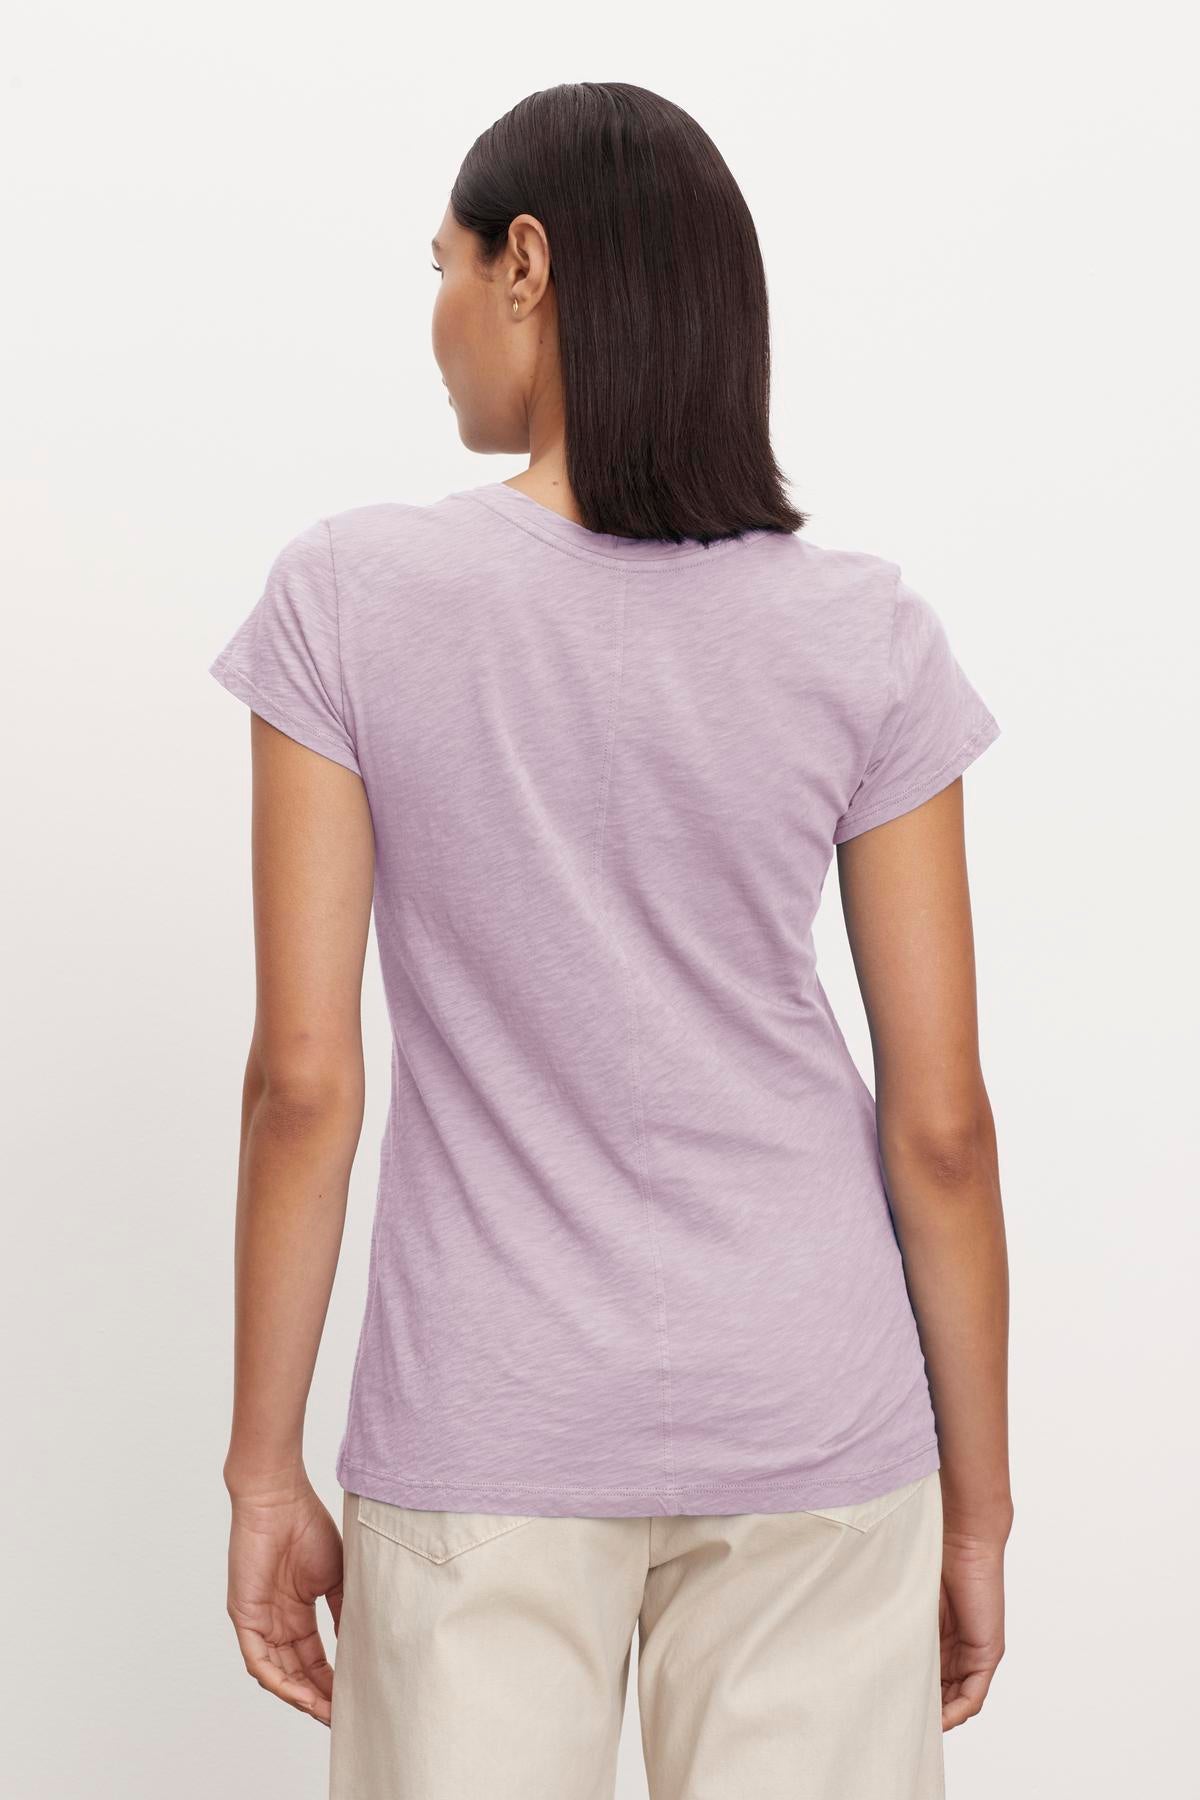 A person with short, dark hair stands facing away, wearing a light purple ODELIA TEE by Velvet by Graham & Spencer with a classic crew neckline and beige pants against a plain white background. The t-shirt is made from premium cotton, making it a wardrobe essential.-37249868595393